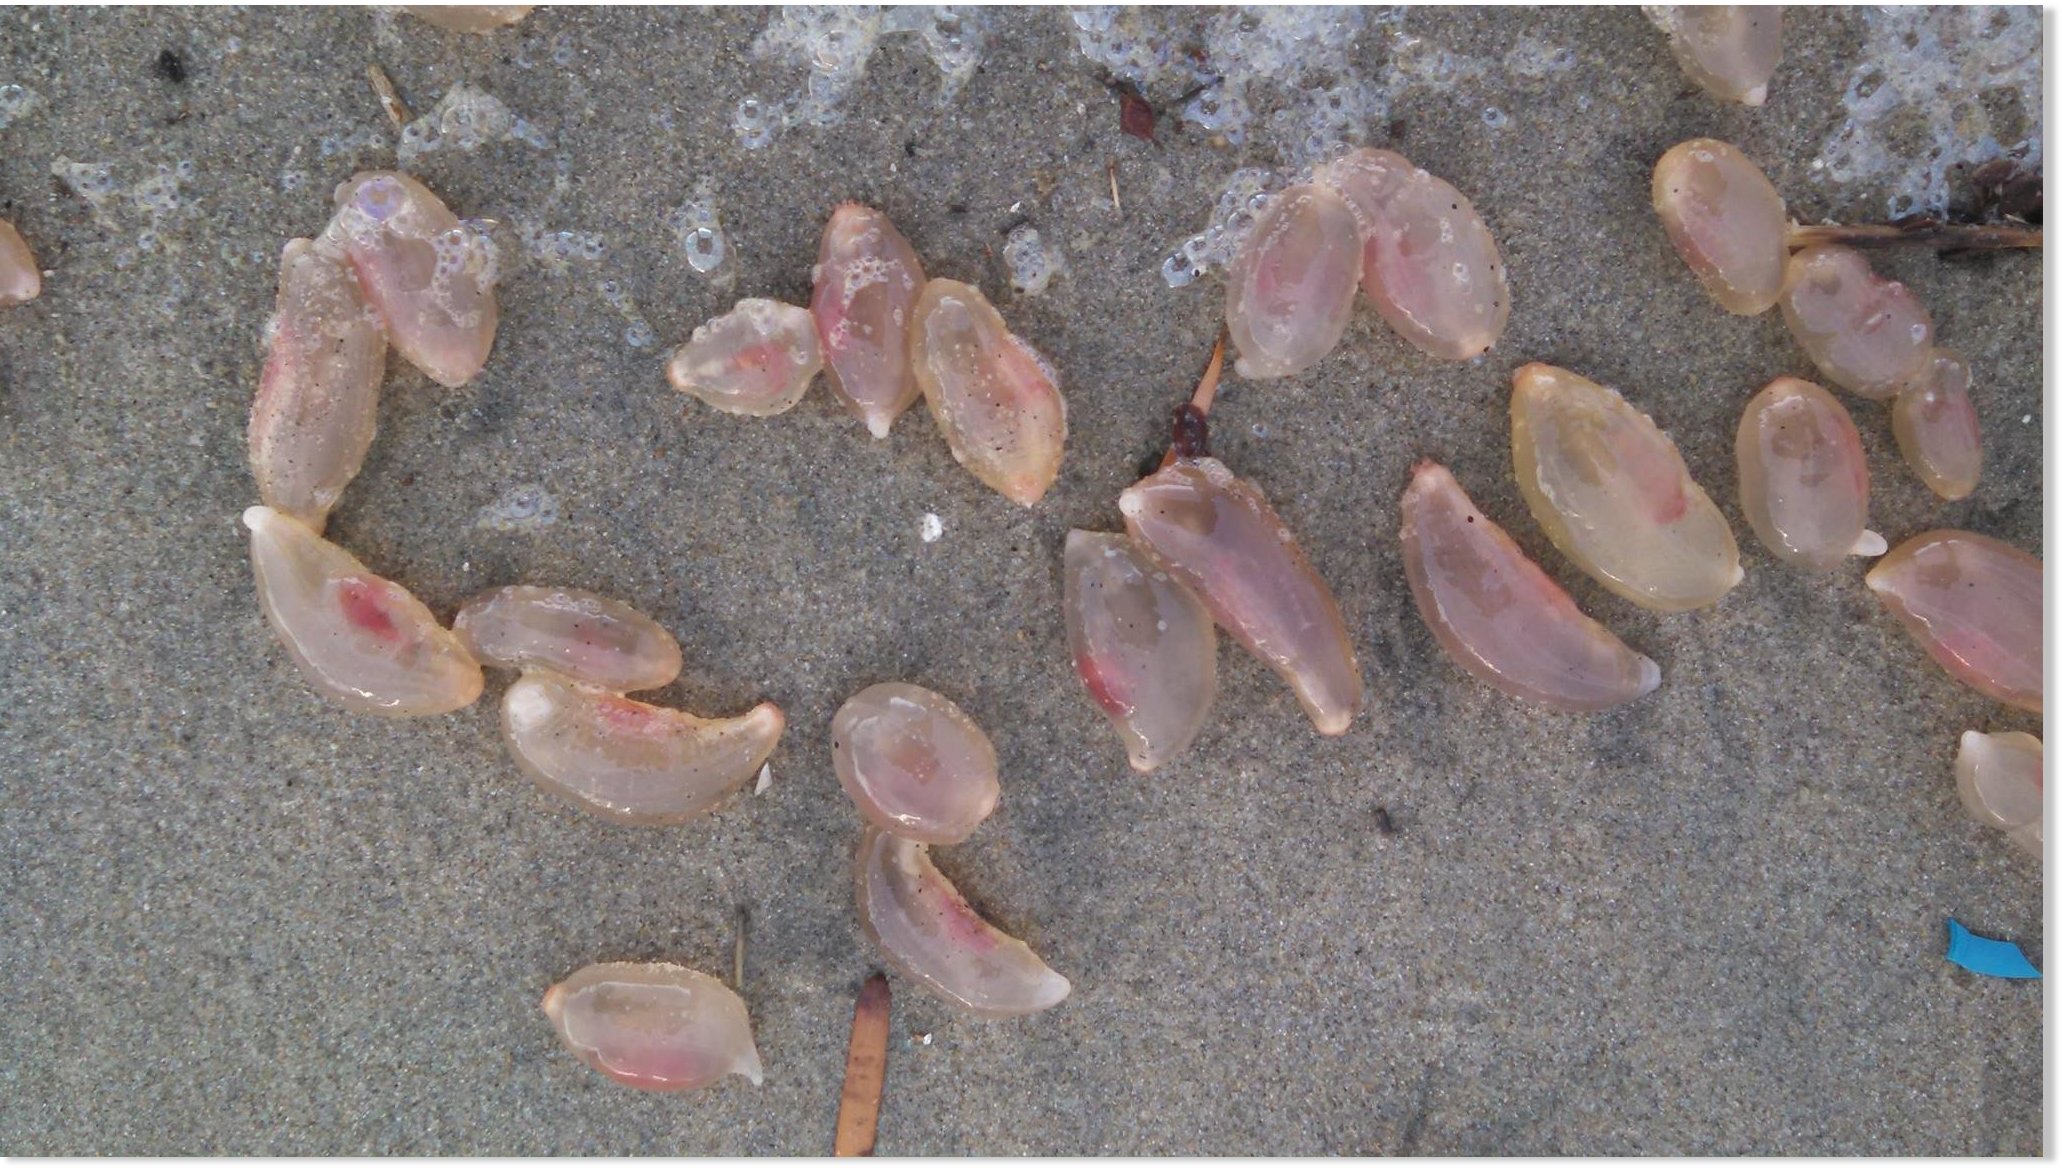 'Thousands' of mysterious jelly-like creatures found at Huntington Beach, California